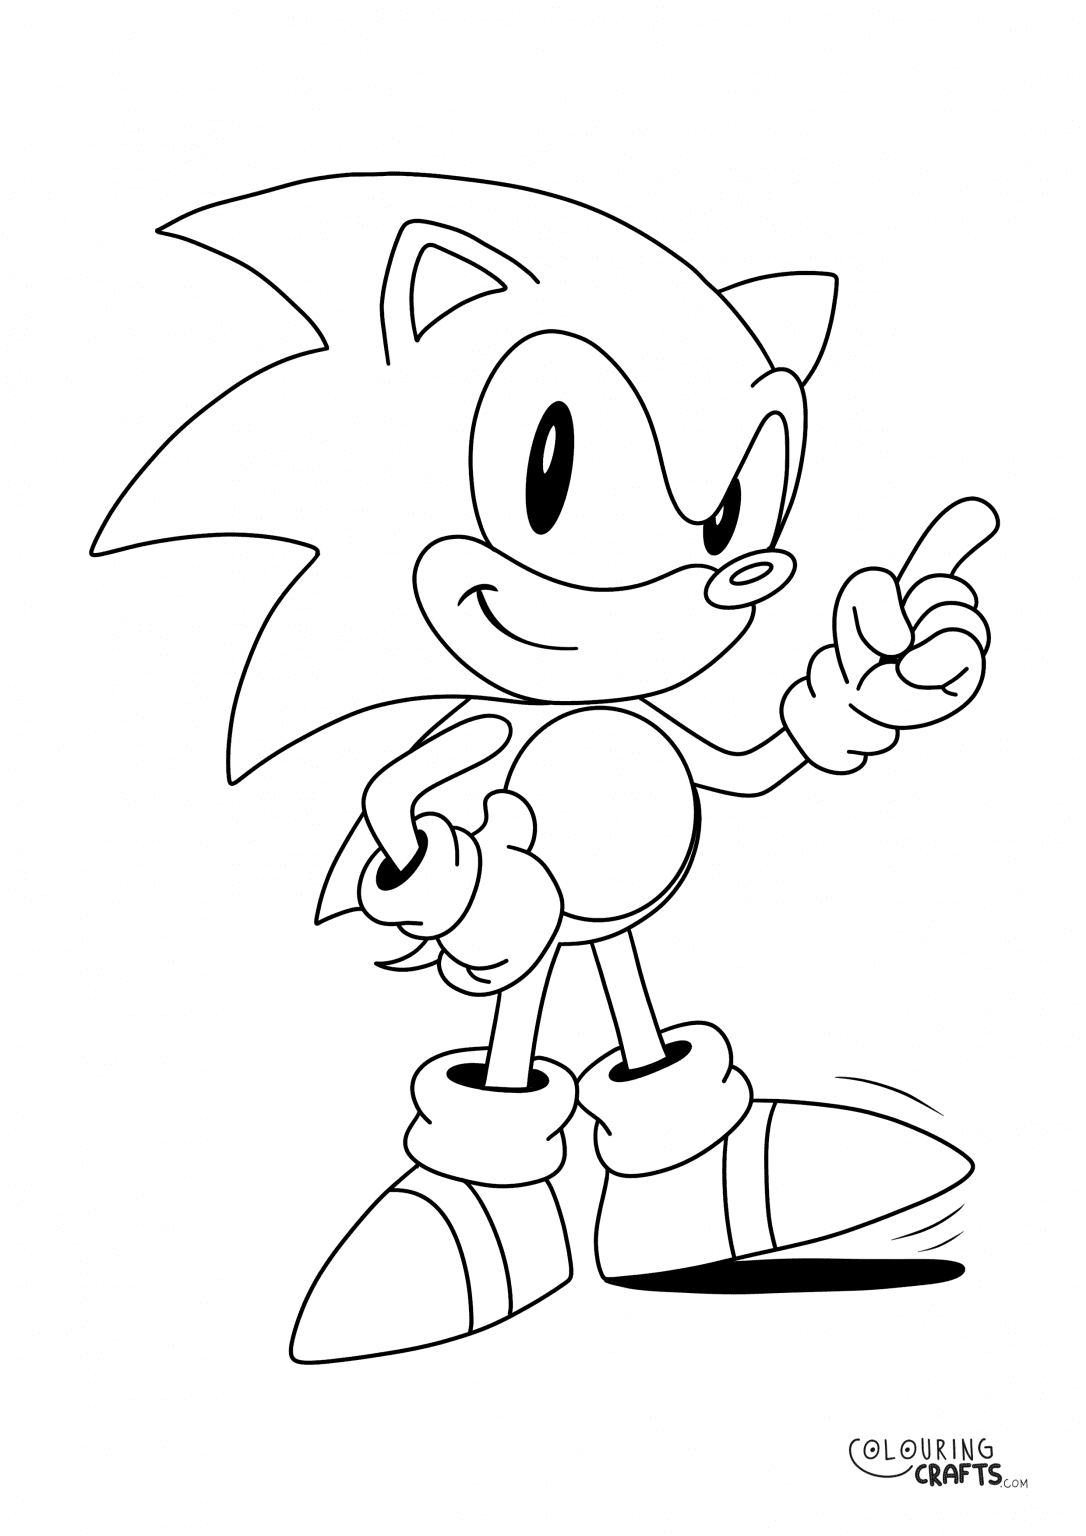 Sonic The Hedgehog Colouring Page - Colouring Crafts